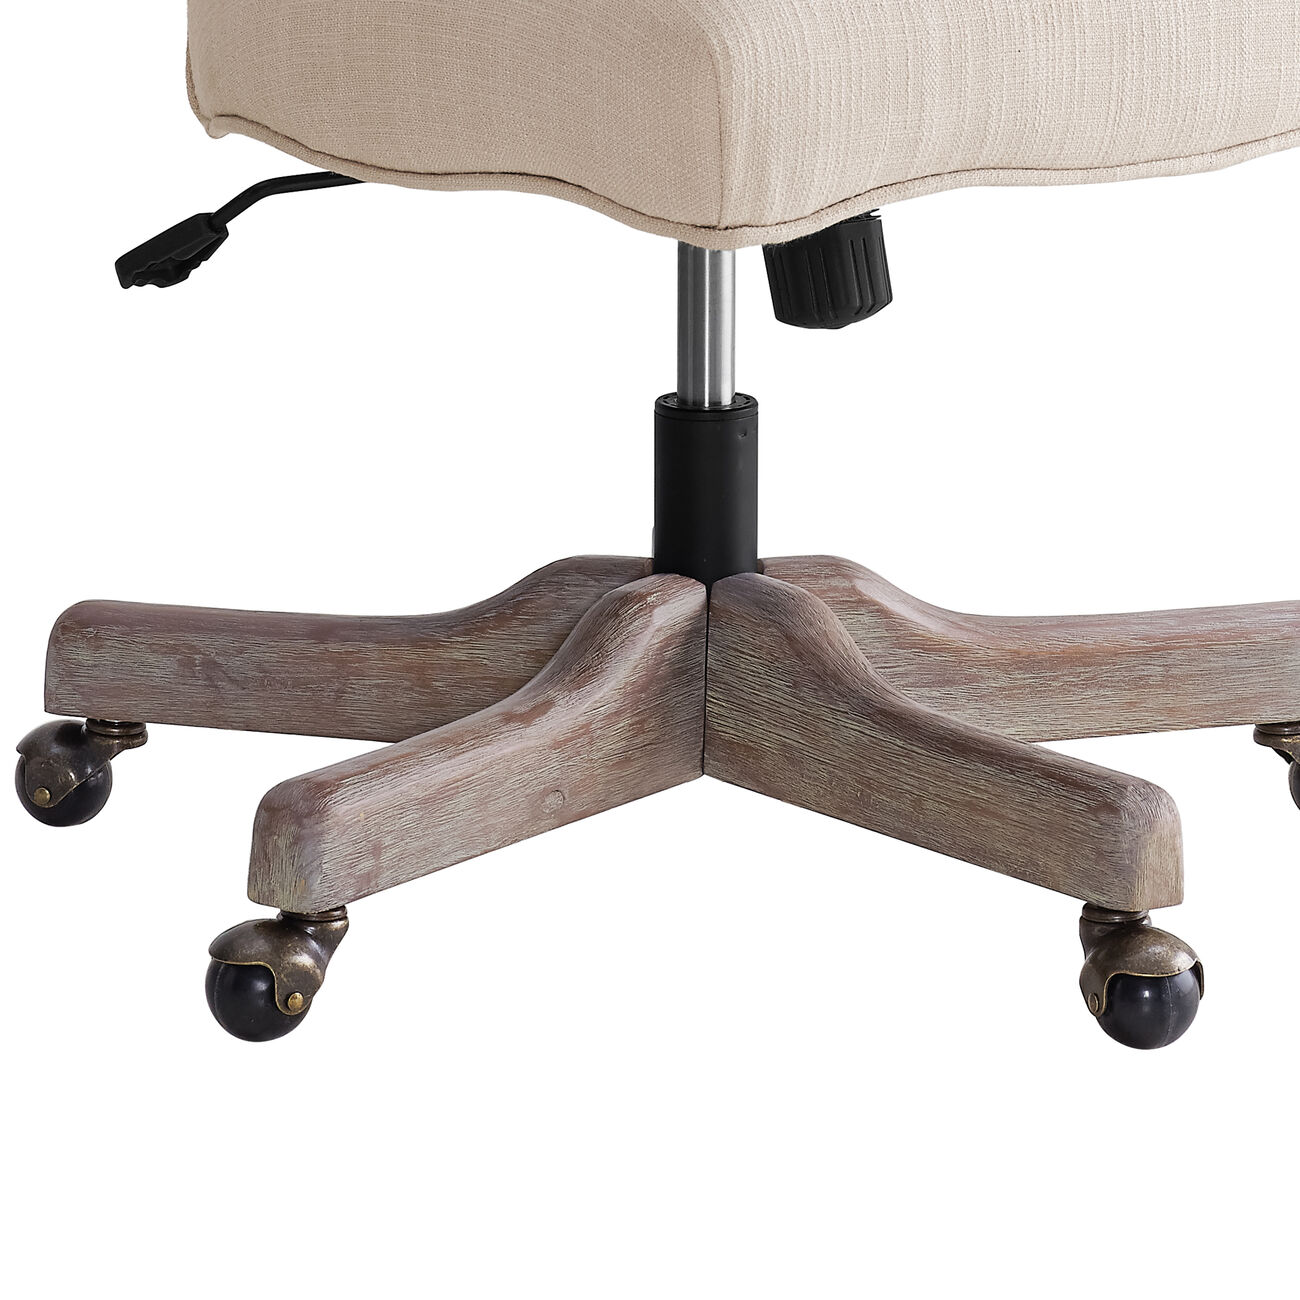 Armless Office Chair with Wooden Base and Tufting, Beige and Brown